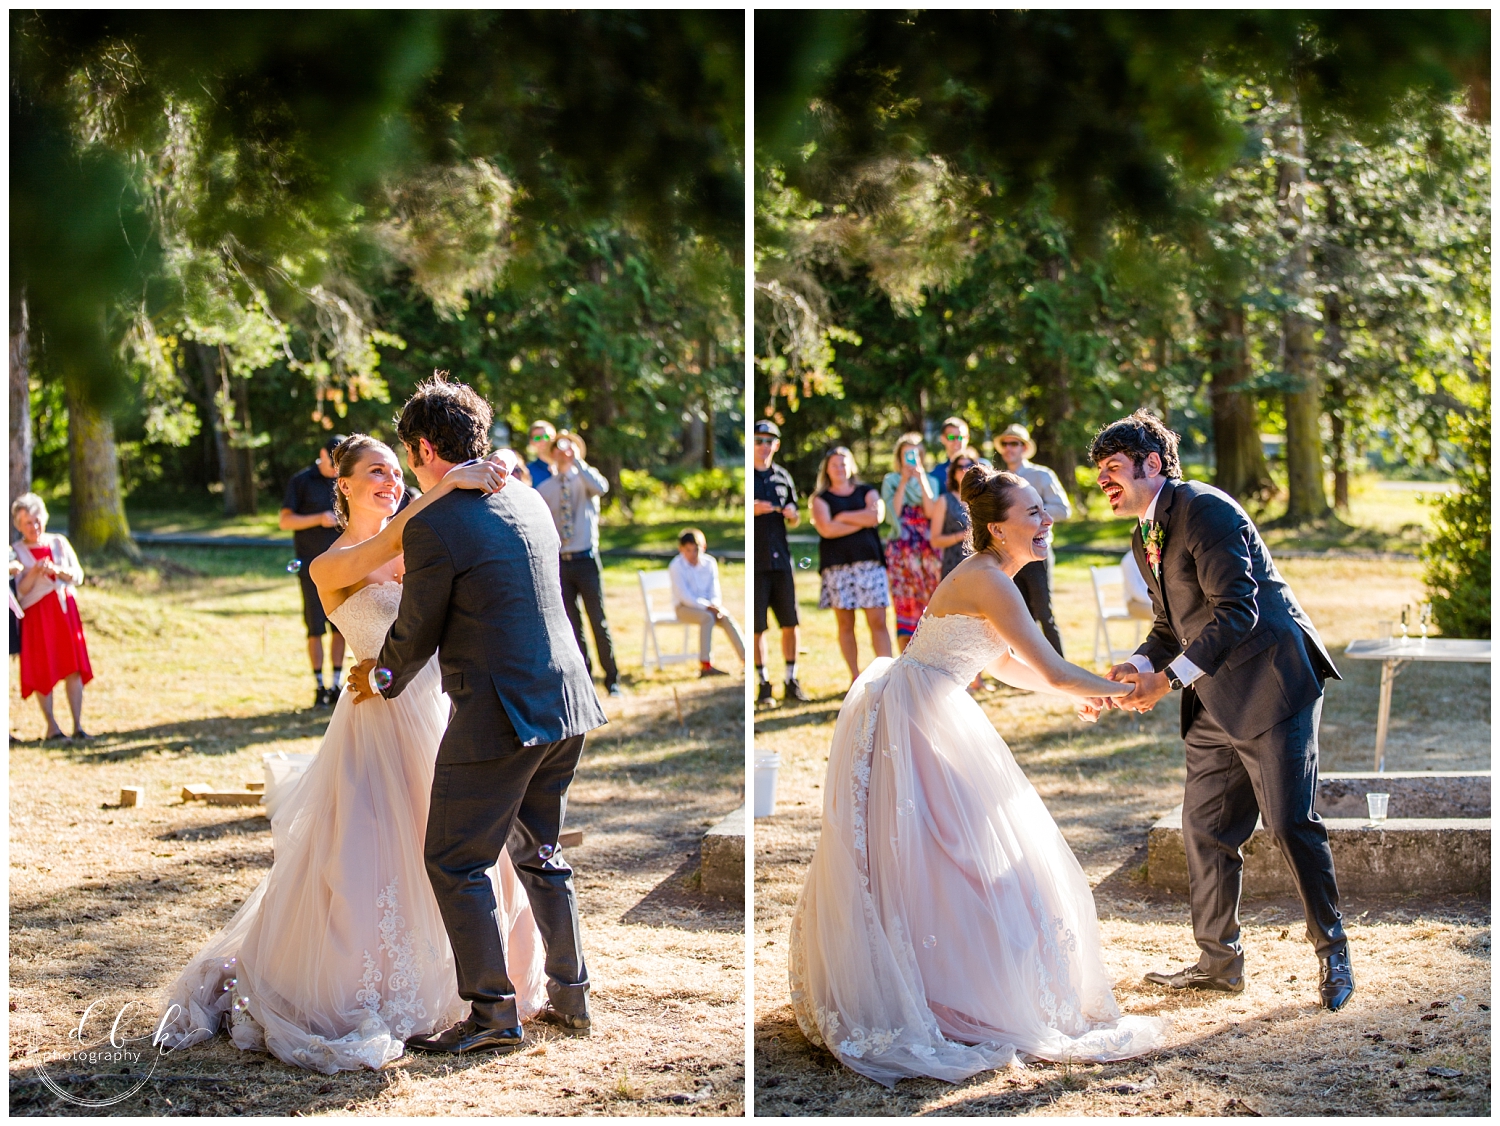 bride and groom share their first dance at wedding in Washington Park, Anacortes